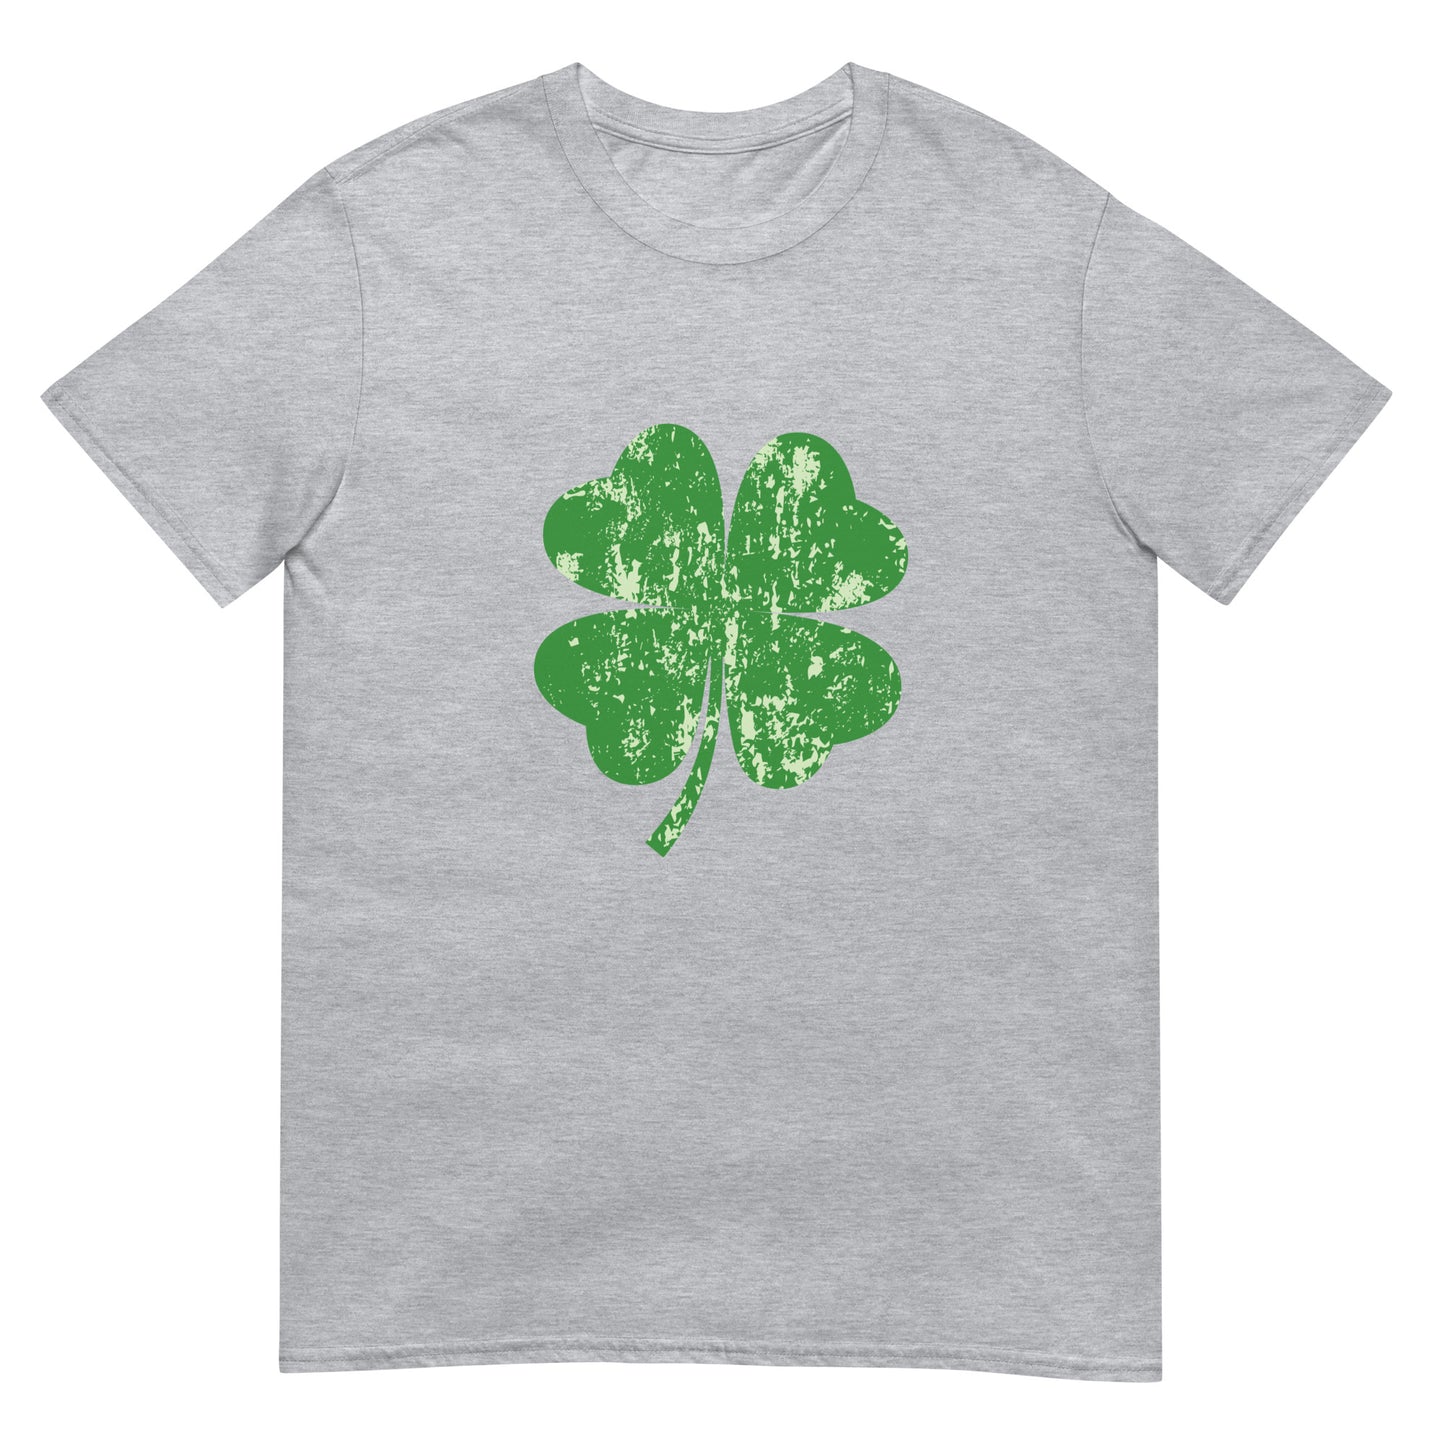 Belico Luck- T-Shirt